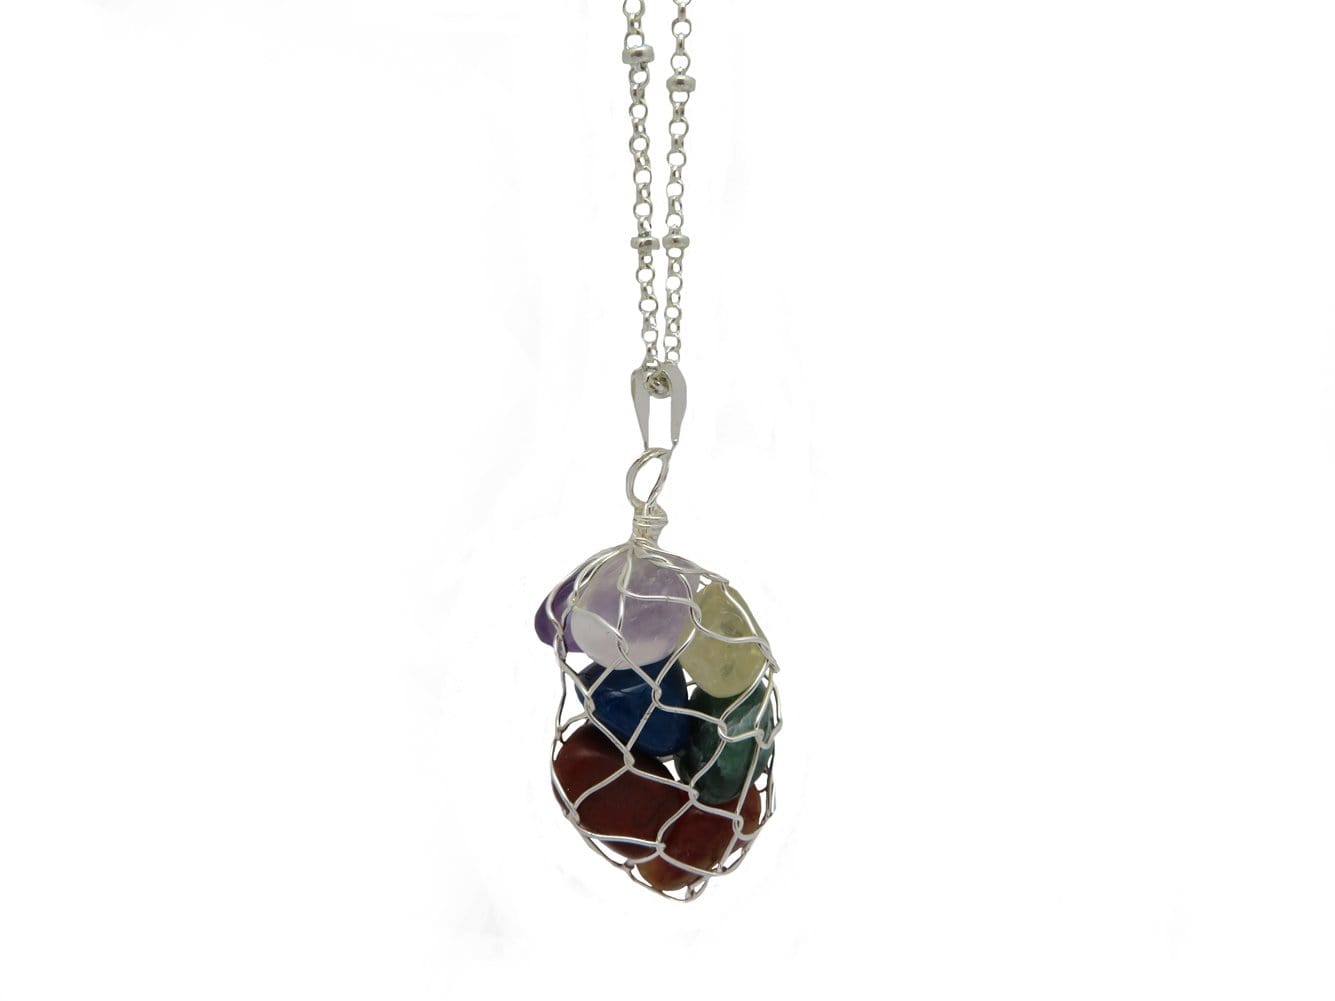 Wired Pendant With Natural 7 Chakra Reiki Healing Stones - on a chain